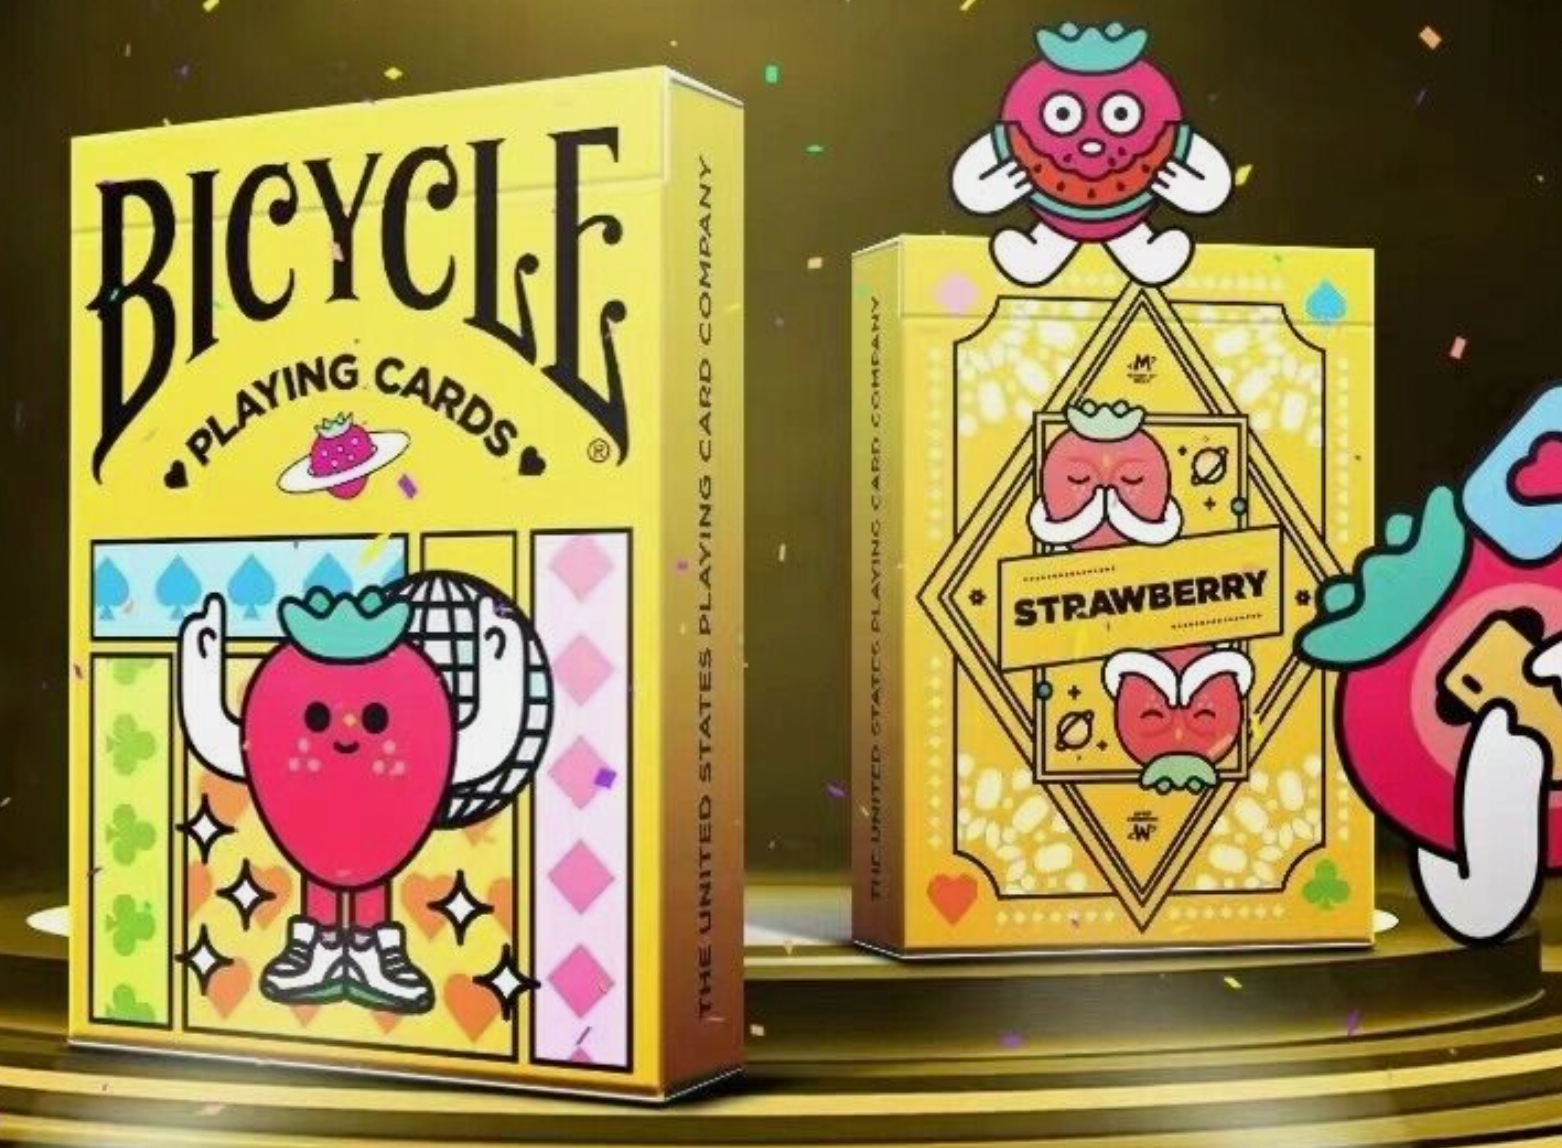 Bicycle Strawberry Festival Playing Cards [Asia Import]